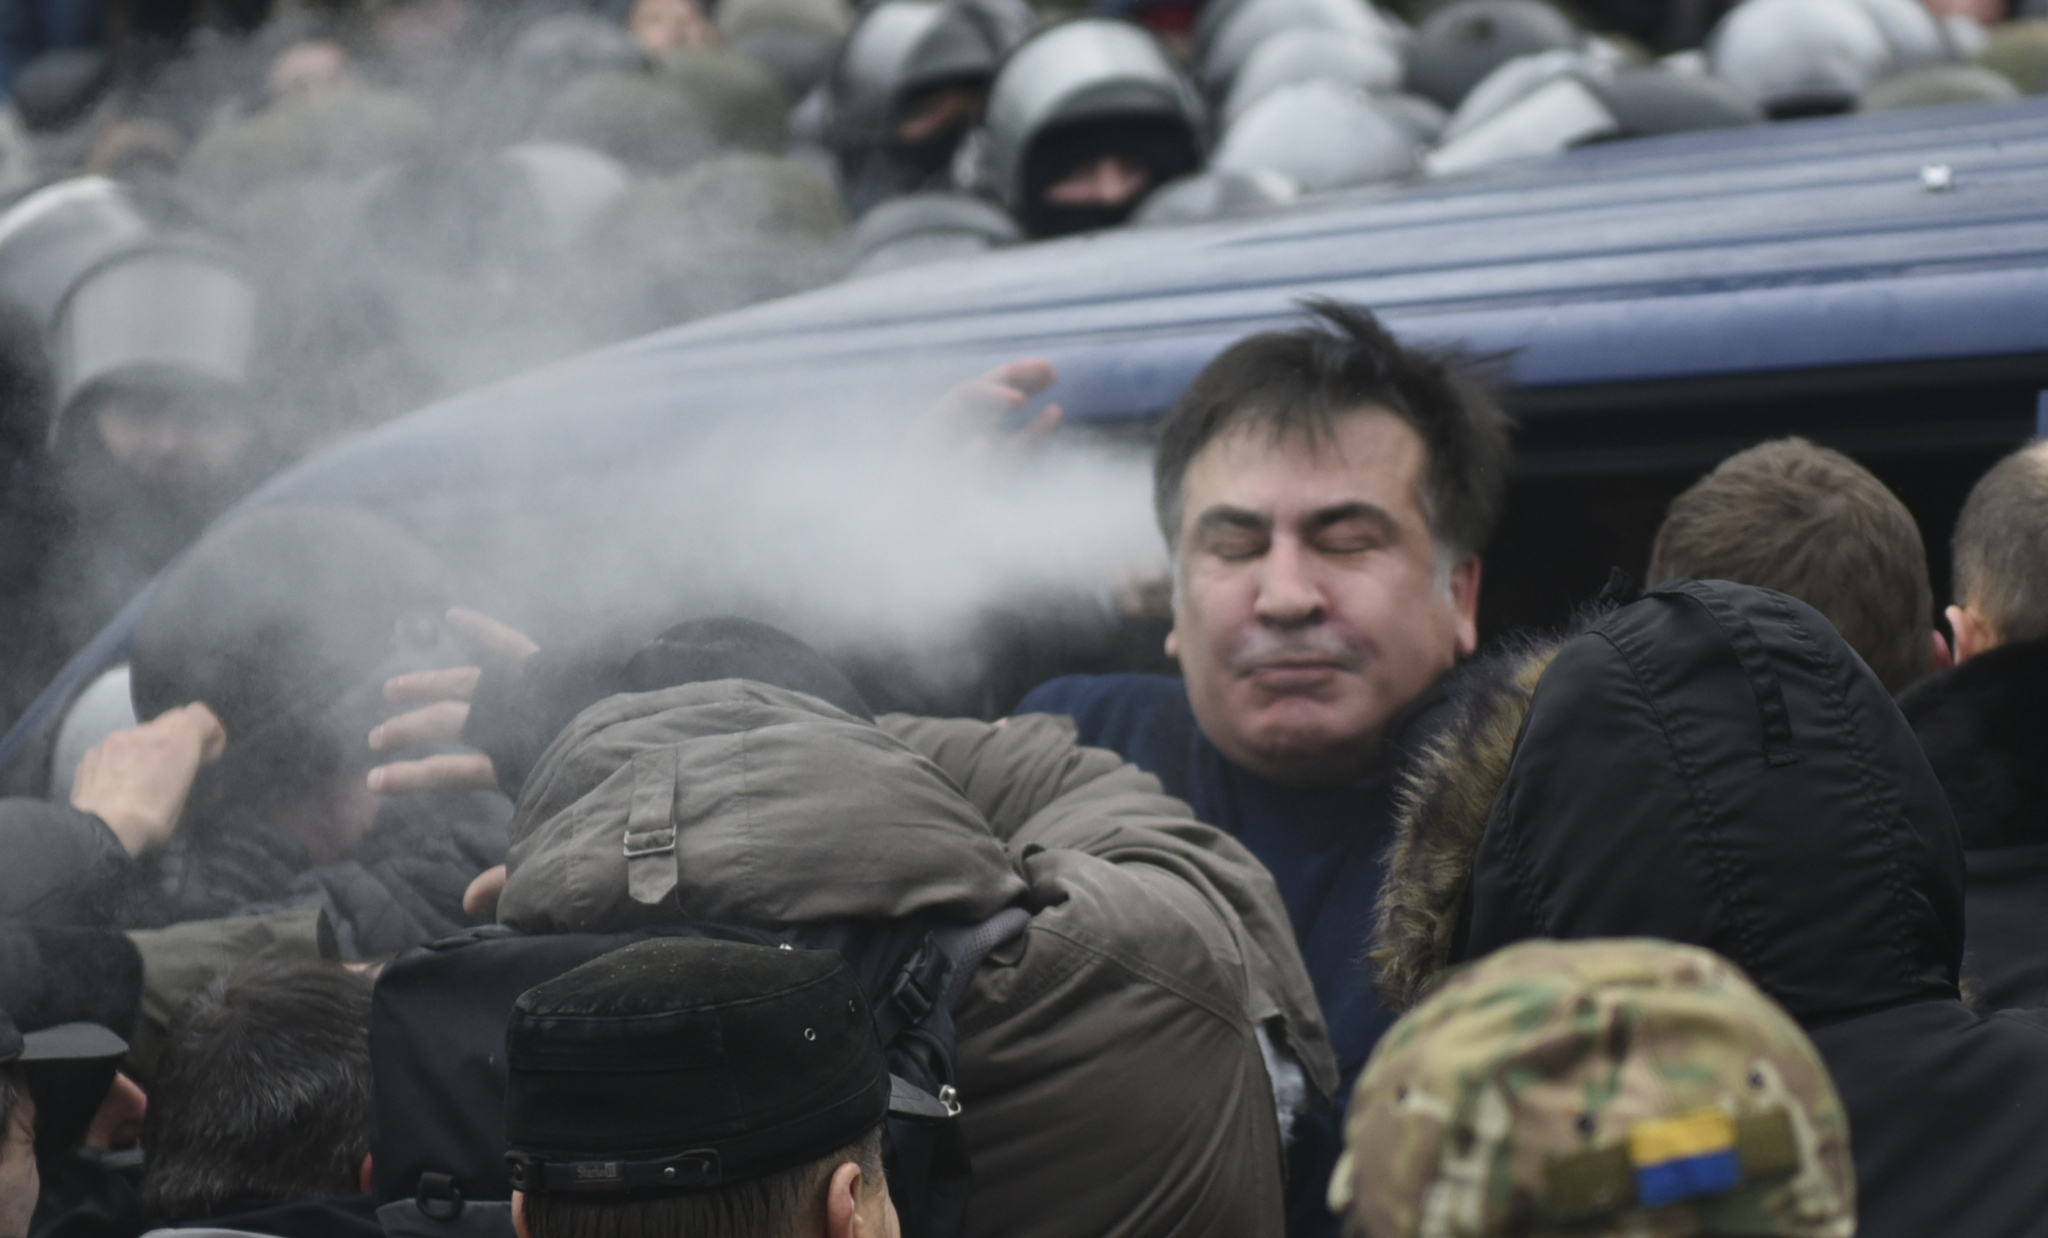 Mikhail Saakashvili, who was the third president of Georgia and leader of the Ukrainian 'Movement of New Forces' opposition party, was arrested Tuesday morning